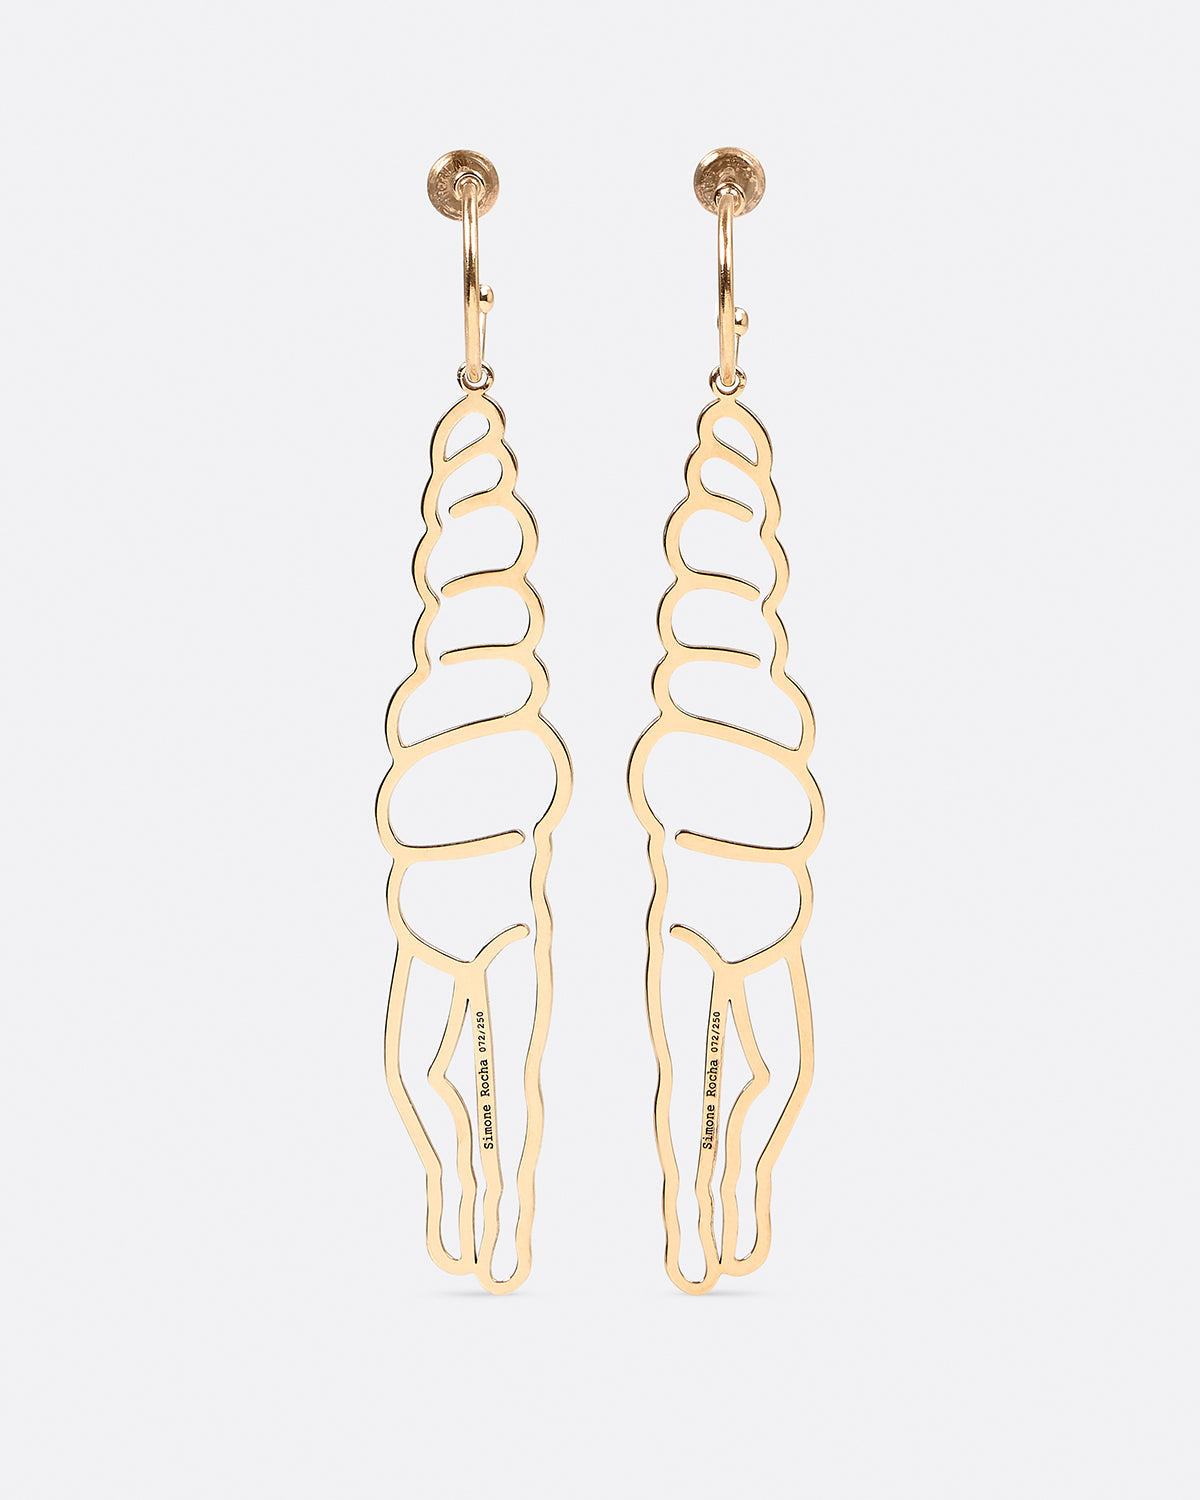 Louise Bourgeois 'Spiral Woman' Earrings Edition